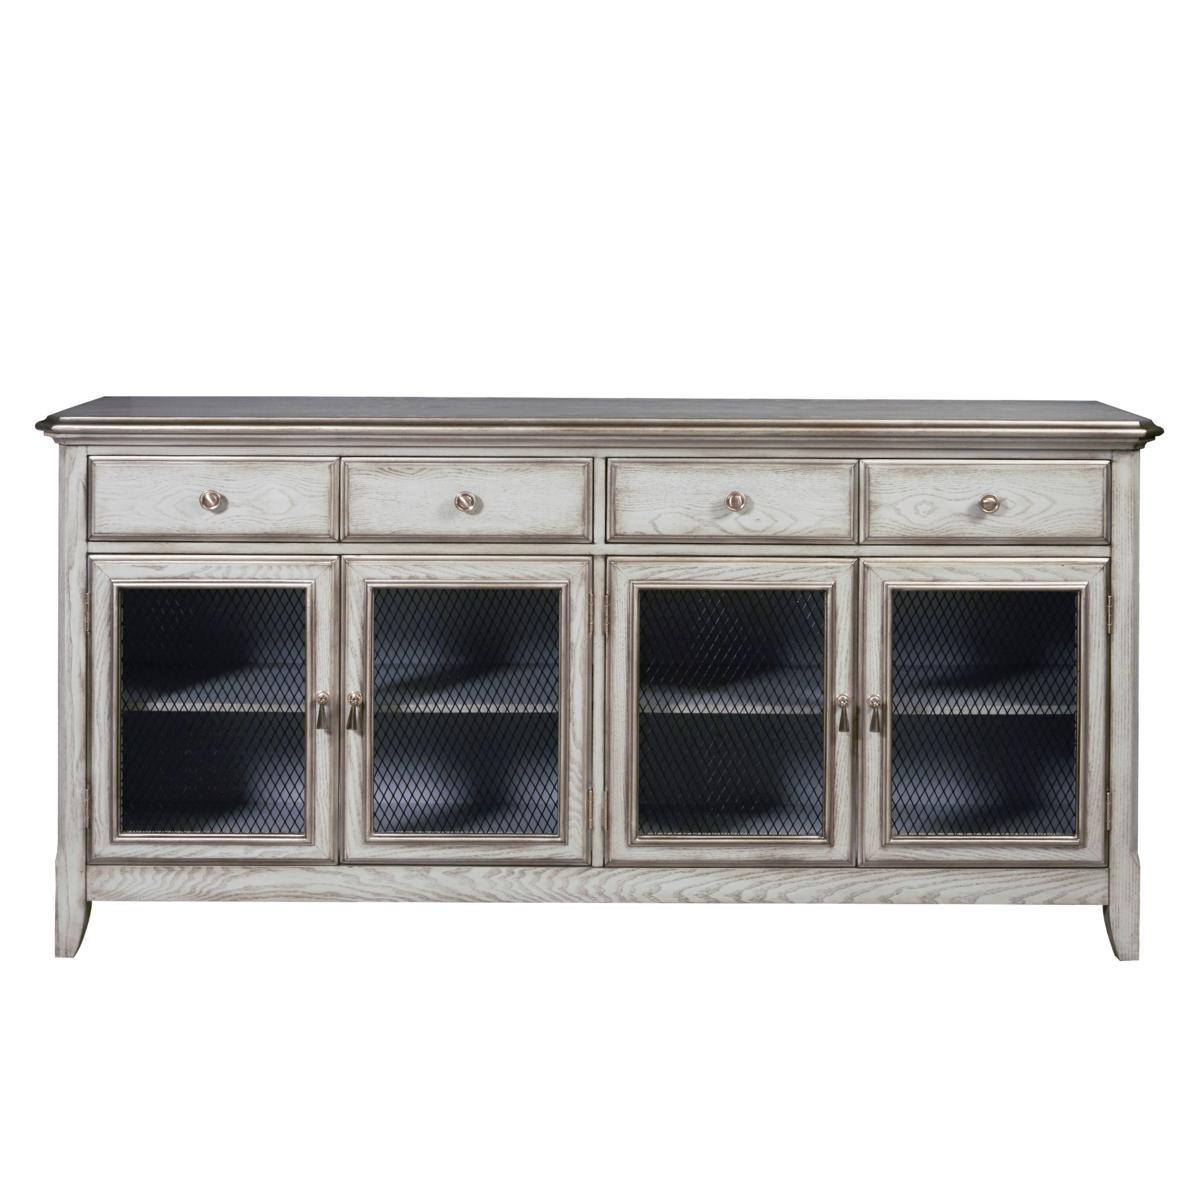 Pulaski Farmhouse Credenza with Wire Mesh Door Inserts in Soft Periwinkle Blue - Luxury Home Furniture (MI)